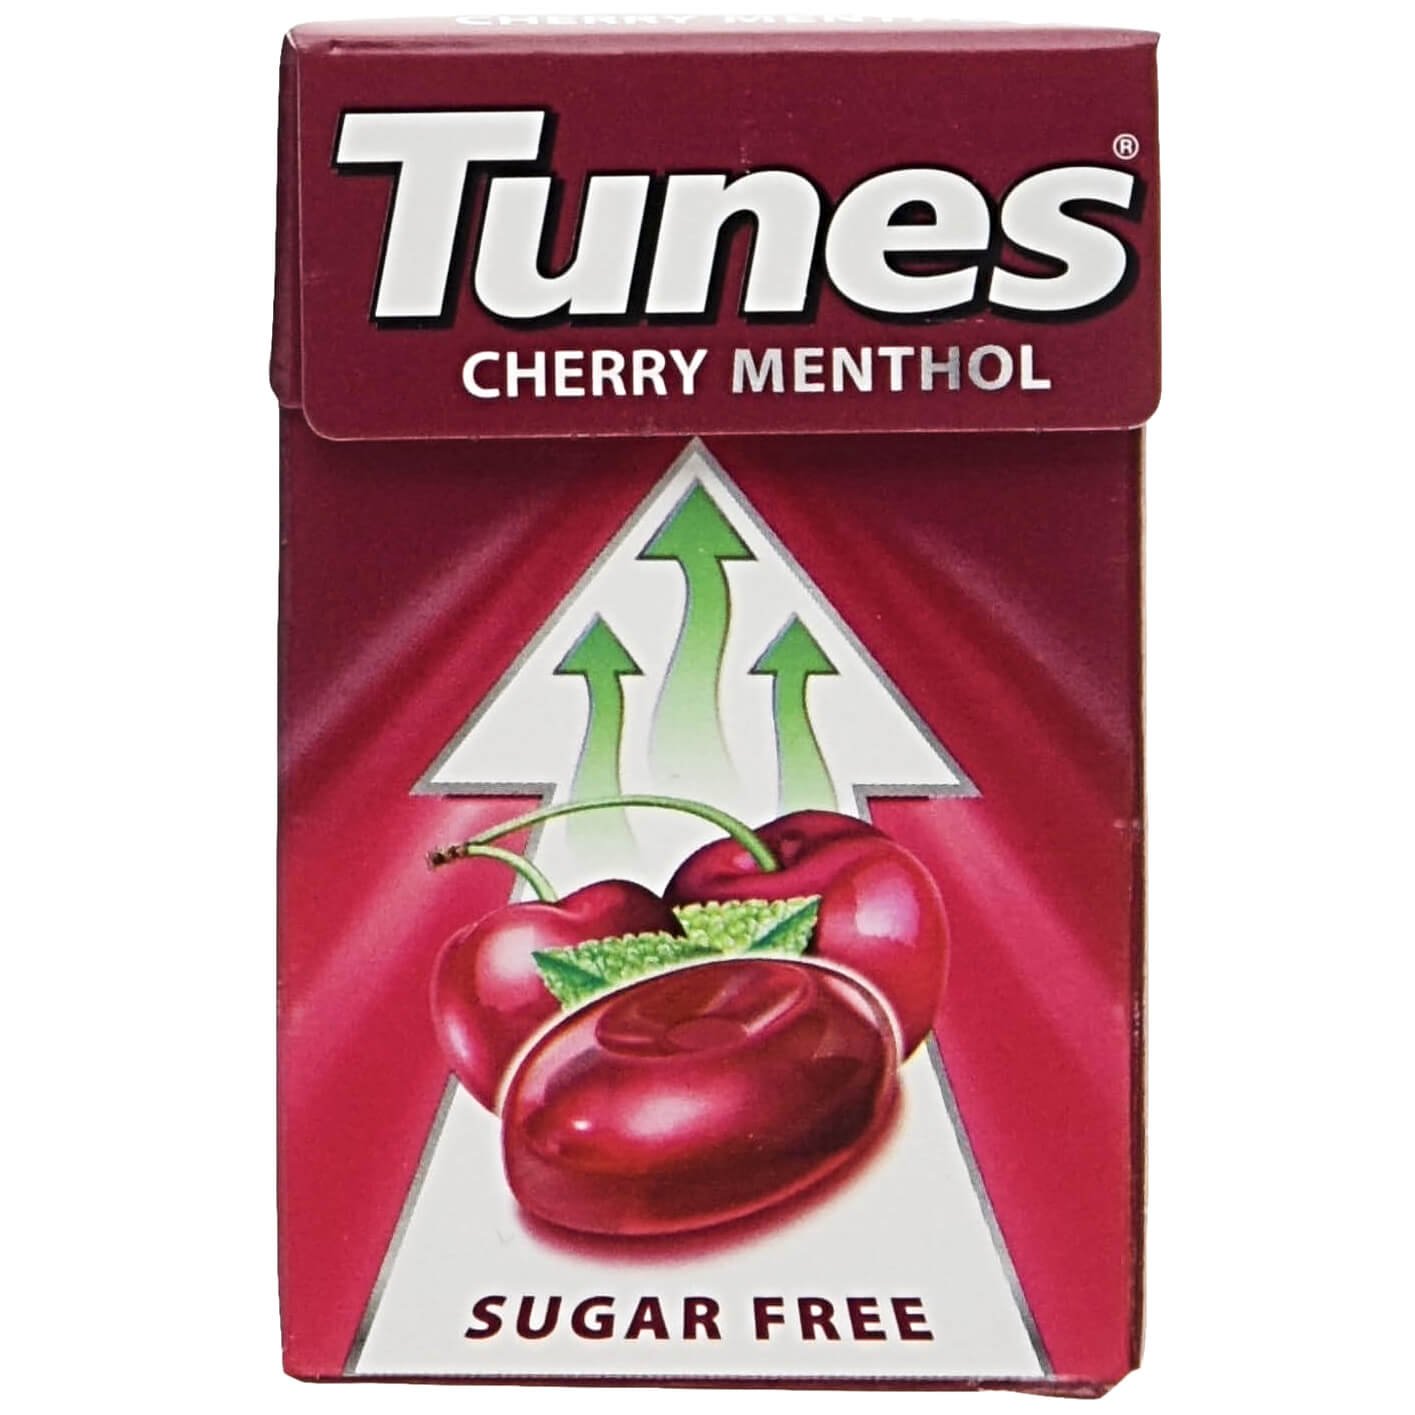 A box of Tune Cherry Menthol, Sugar Free from 2013, with burgendy red and white packaging